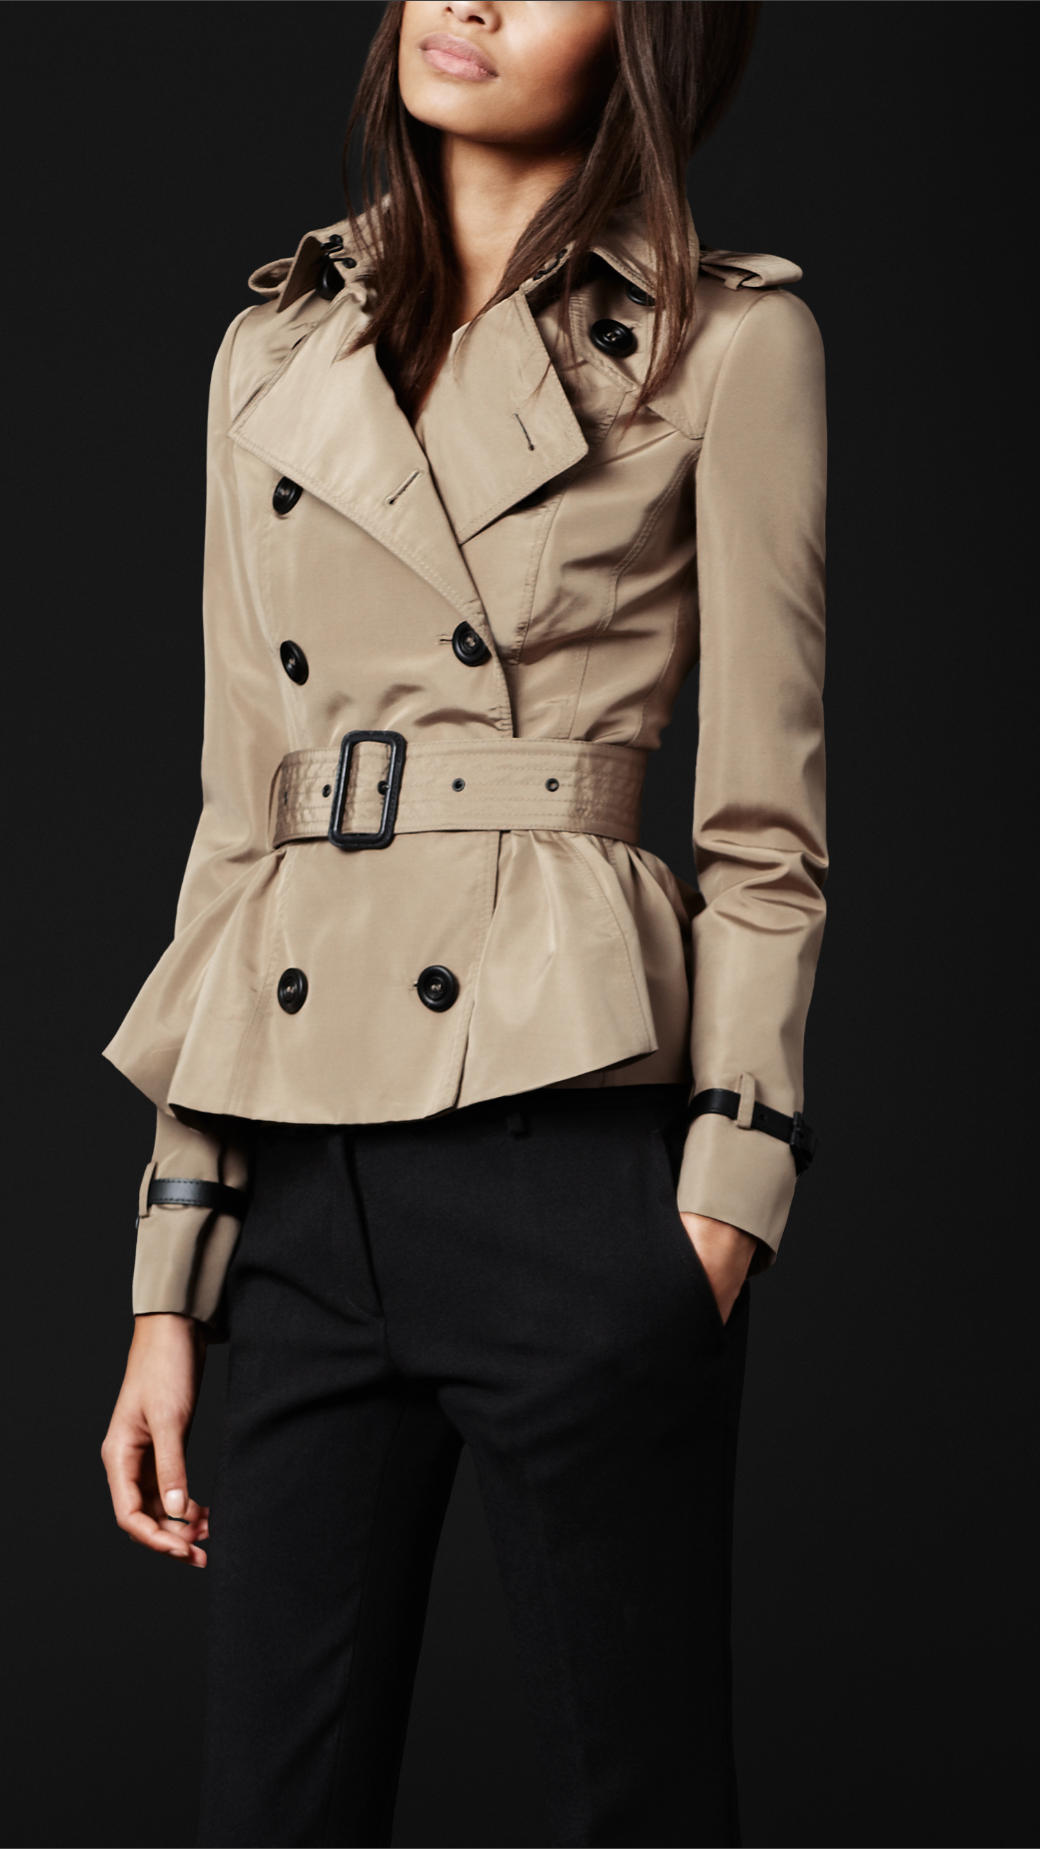 Burberry Prorsum Cropped Peplum Trench Coat in Dark Ivory (Natural) - Lyst